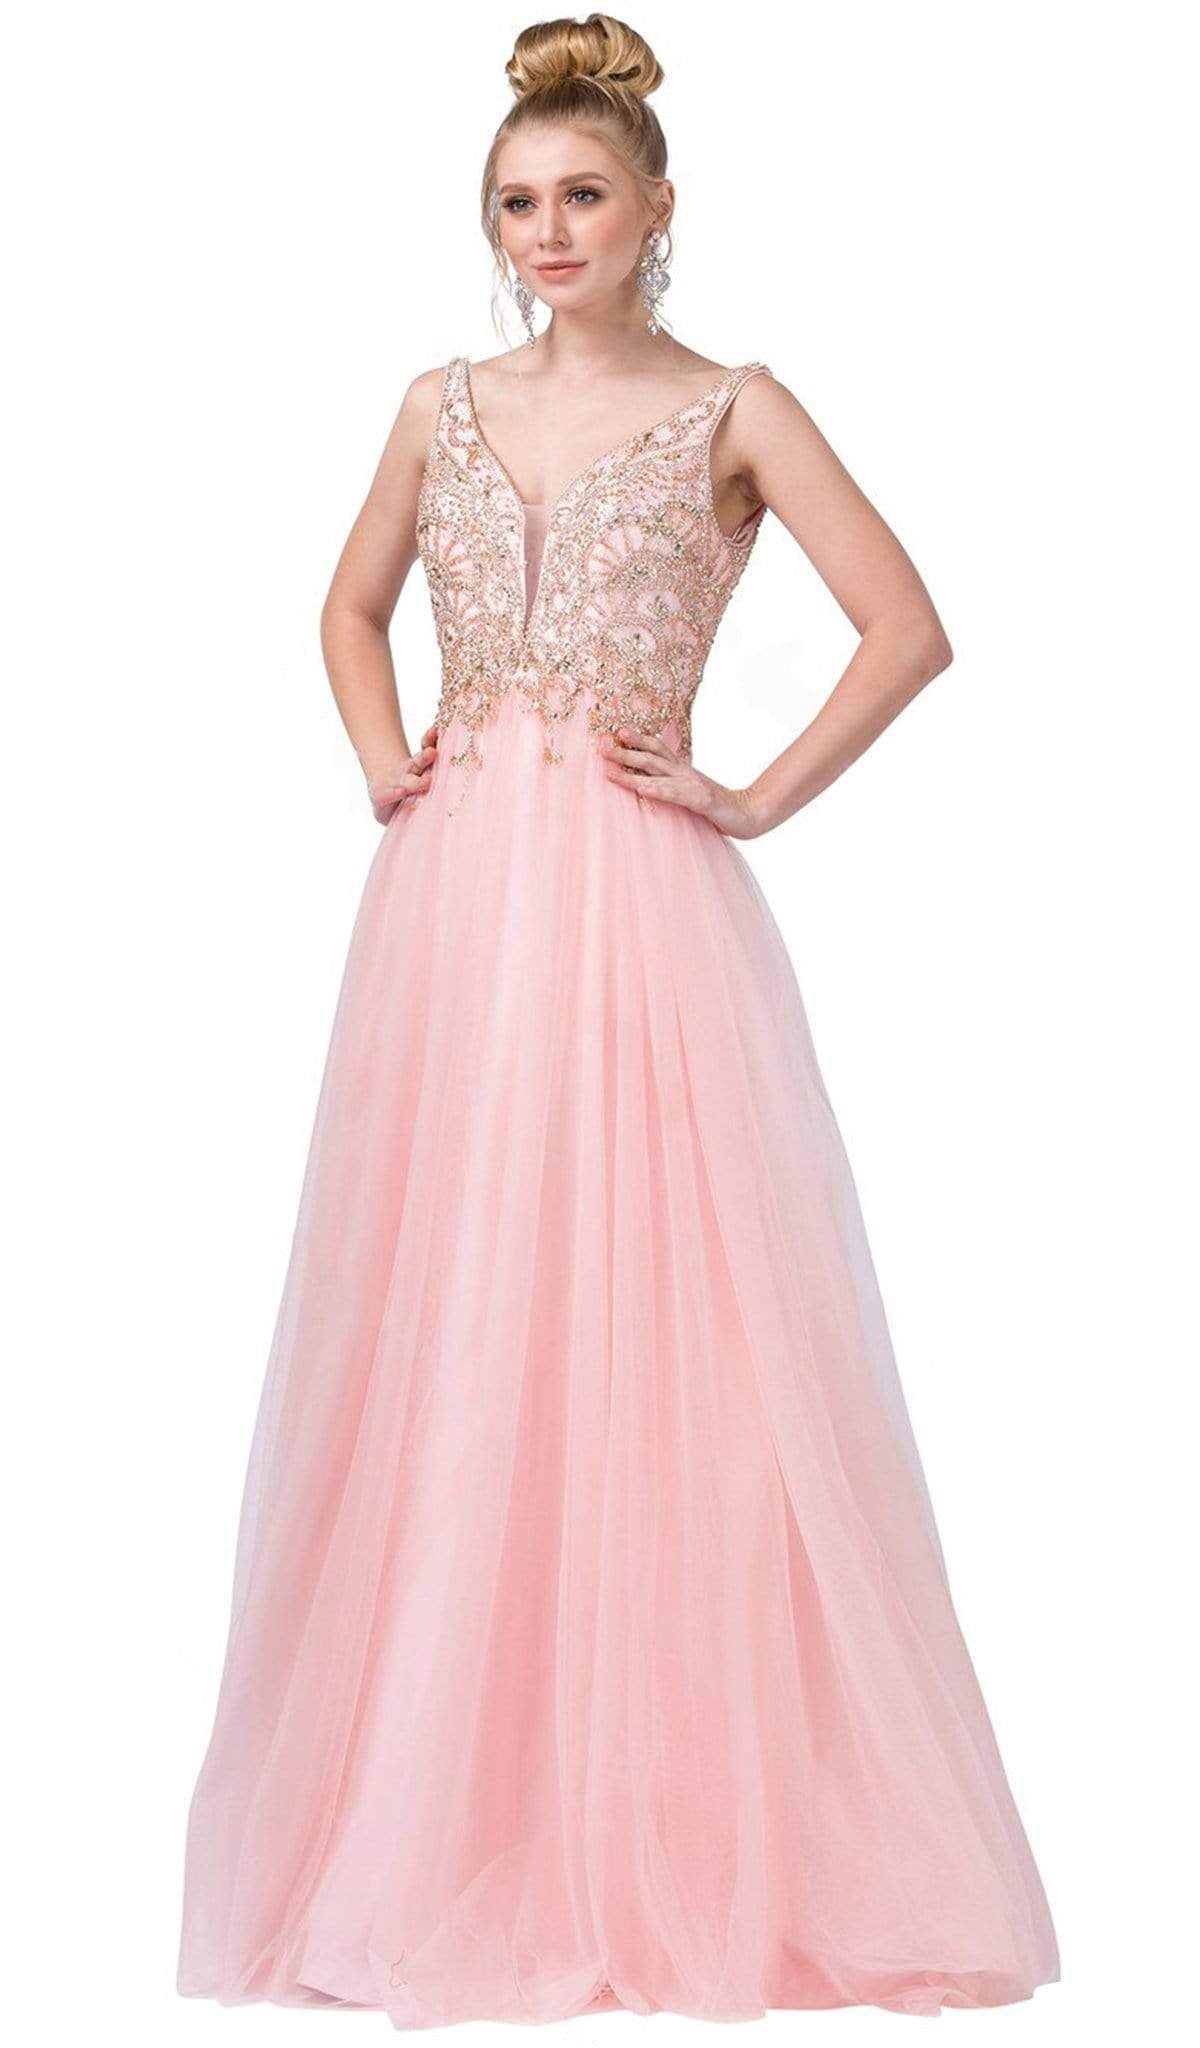 Dancing Queen - 2514 Plunging V-Neck Bejeweled Bodice A-Lin Gown